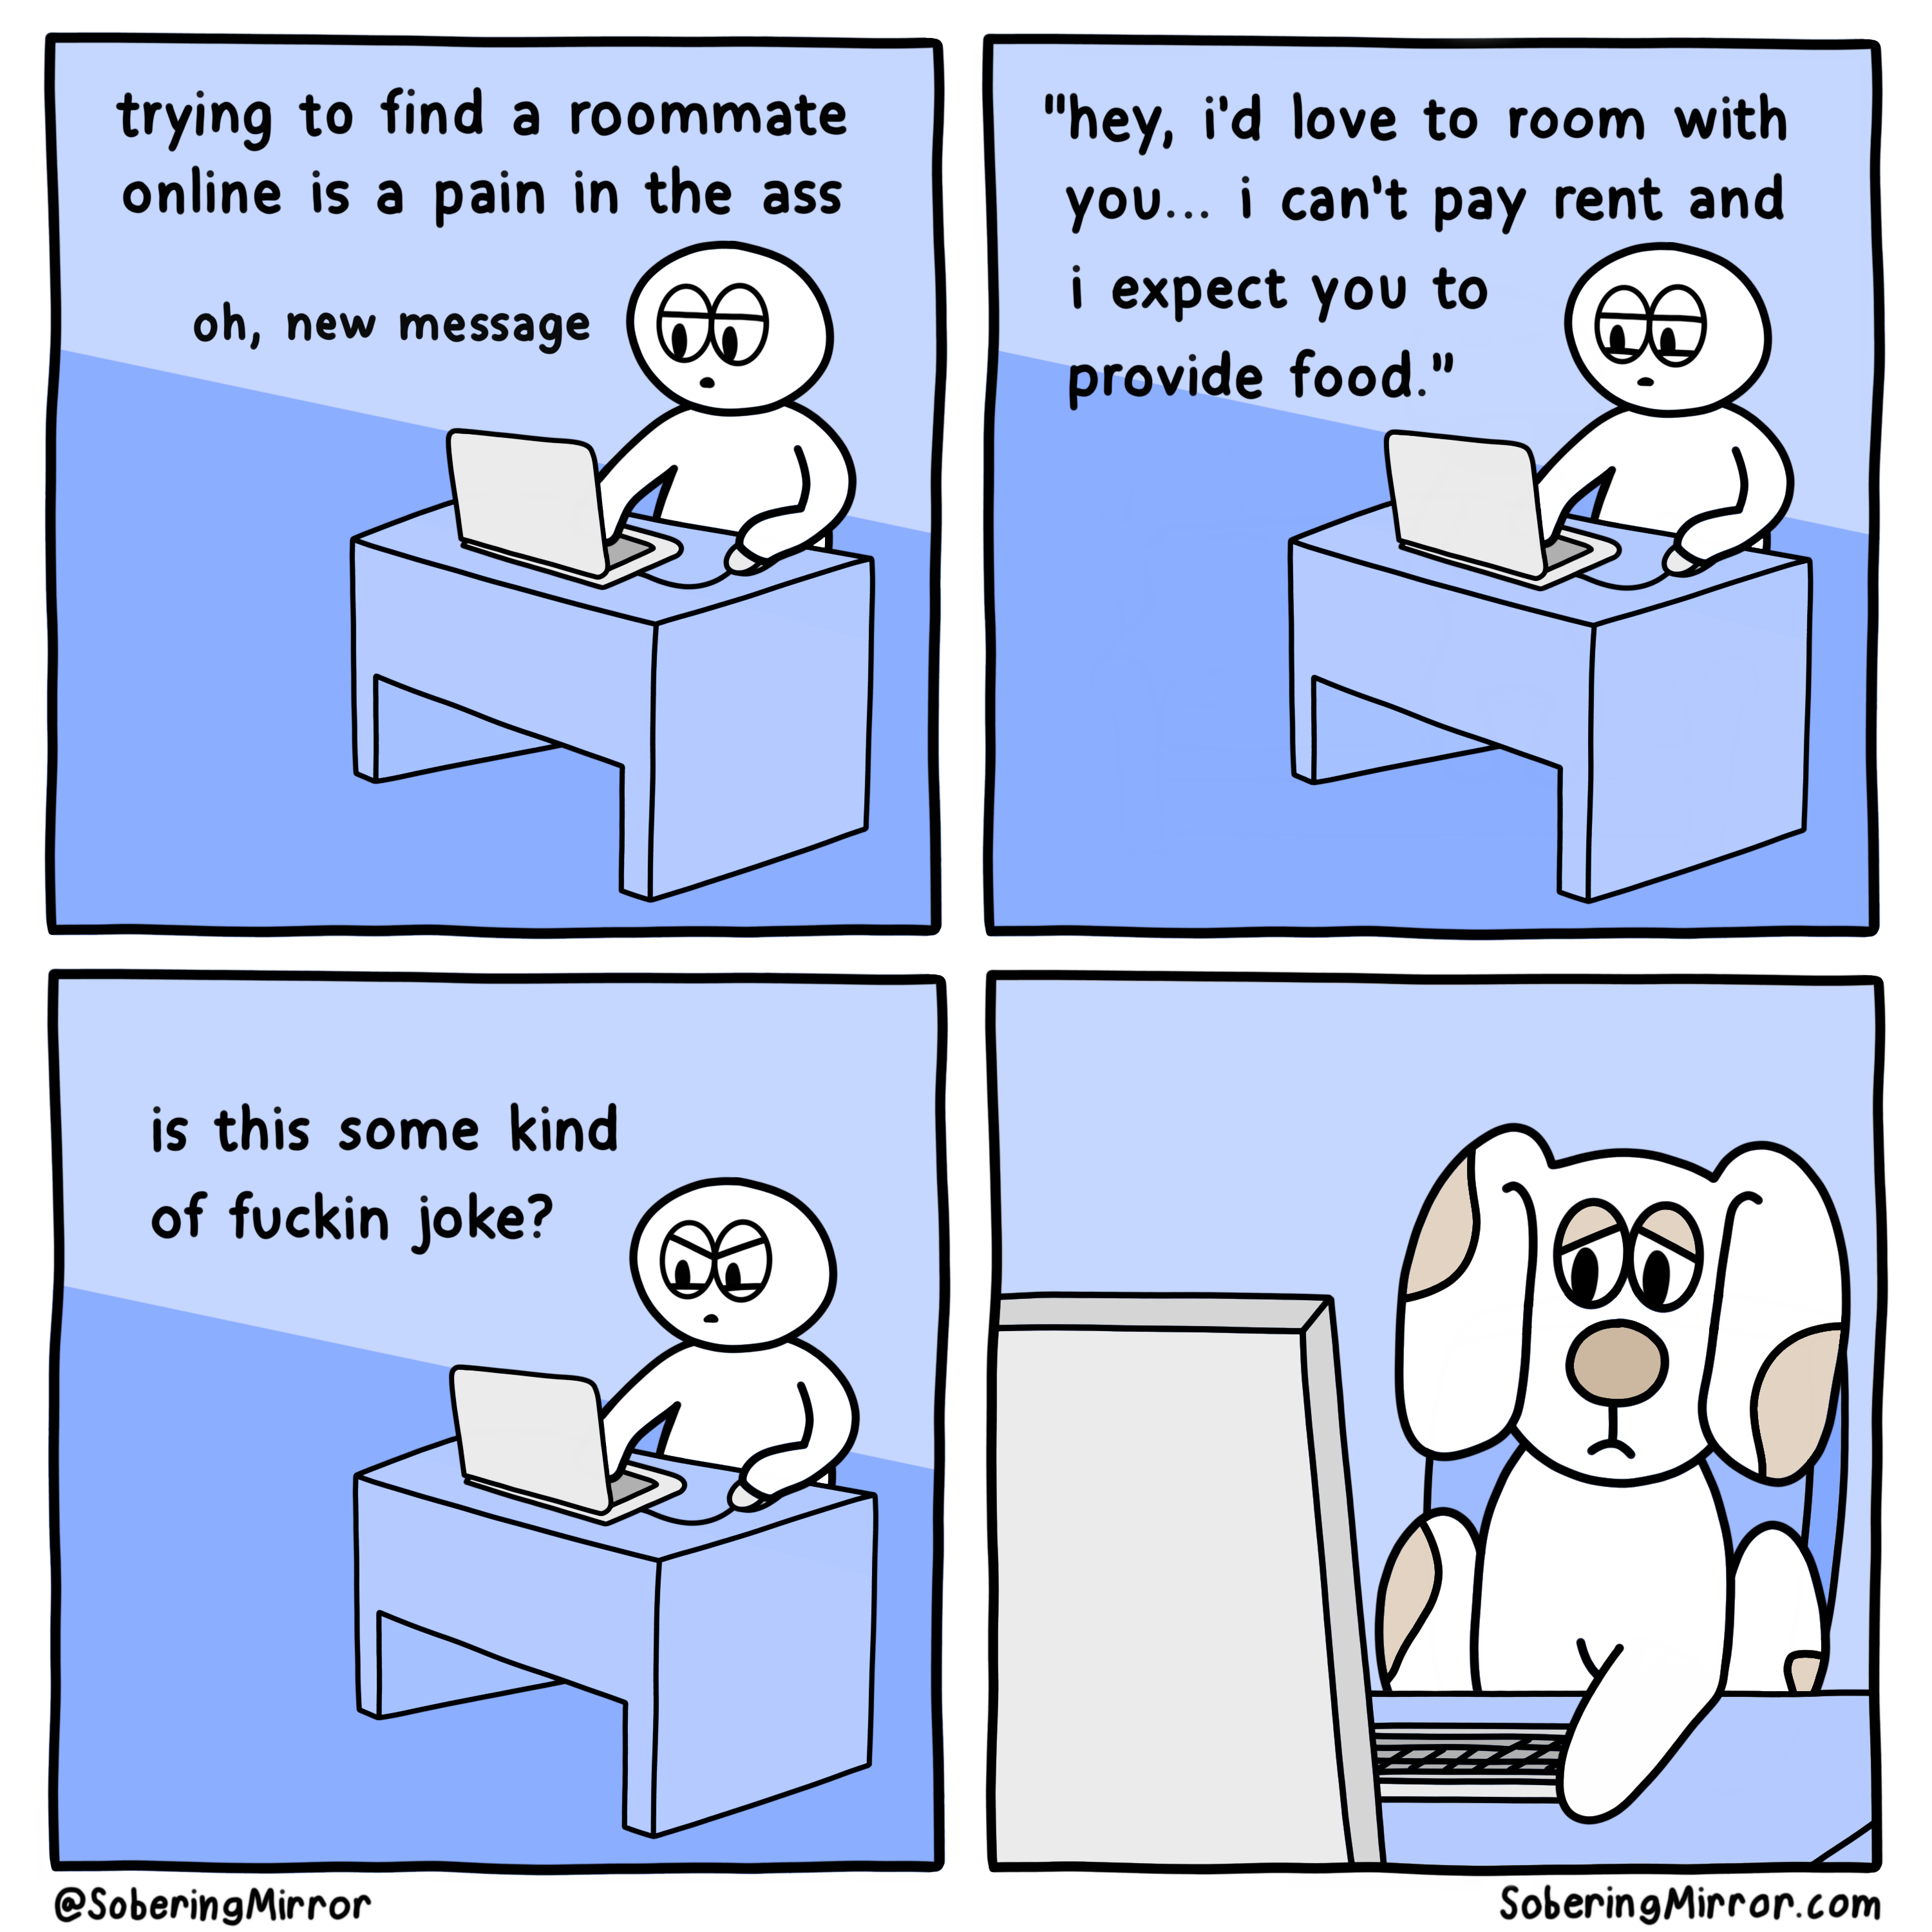 Roommate wanted [OC]